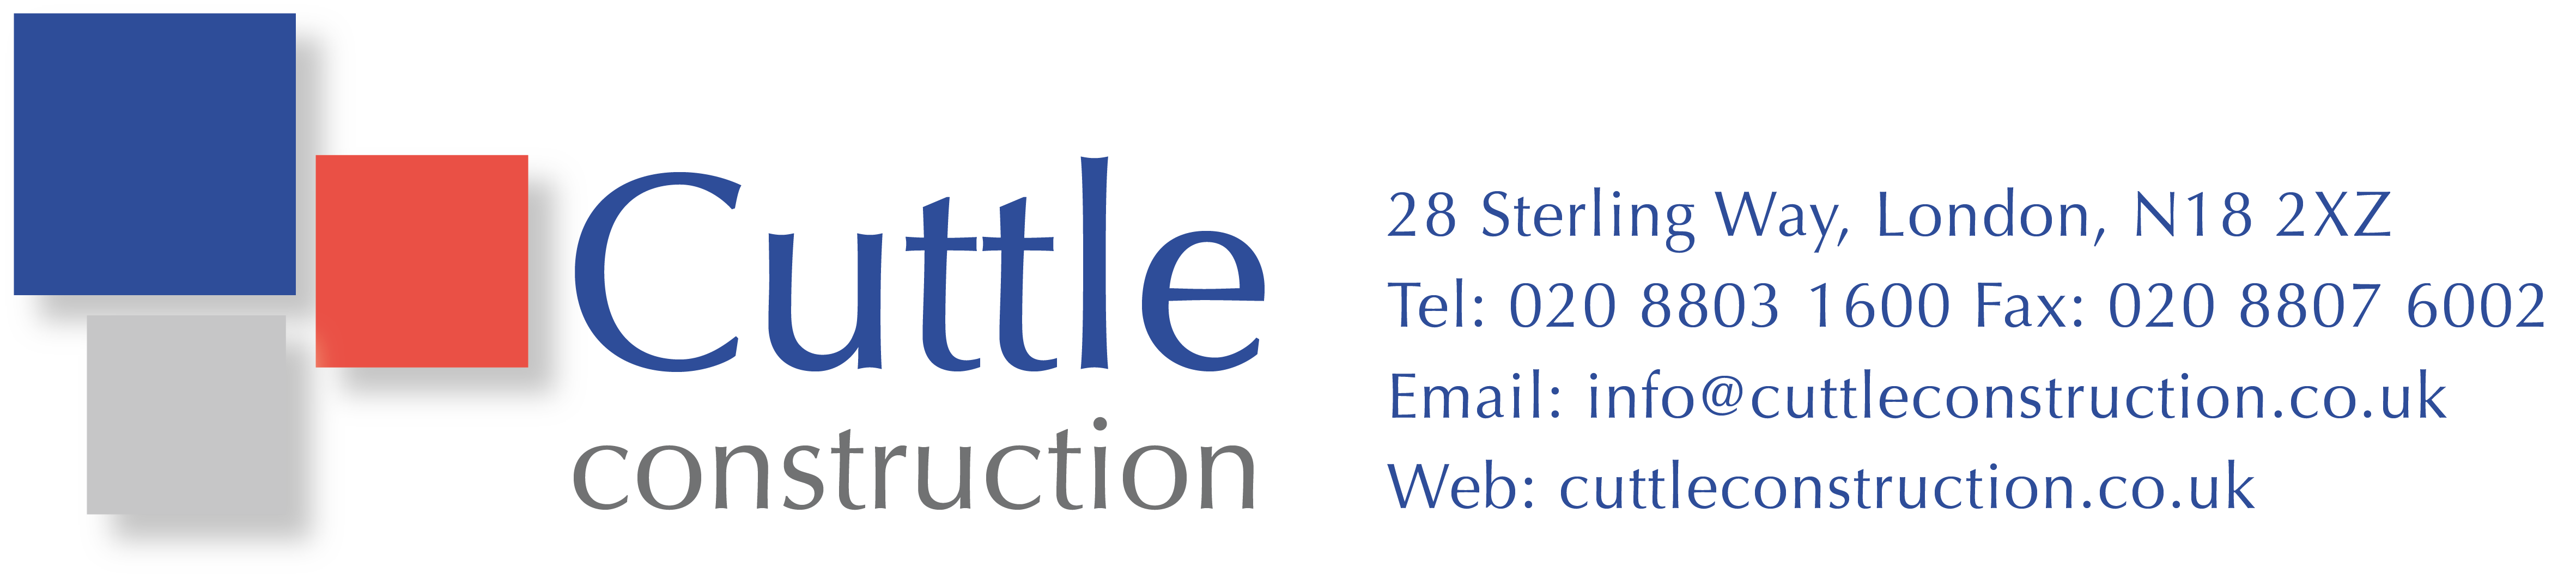 Cuttle Construction Limited